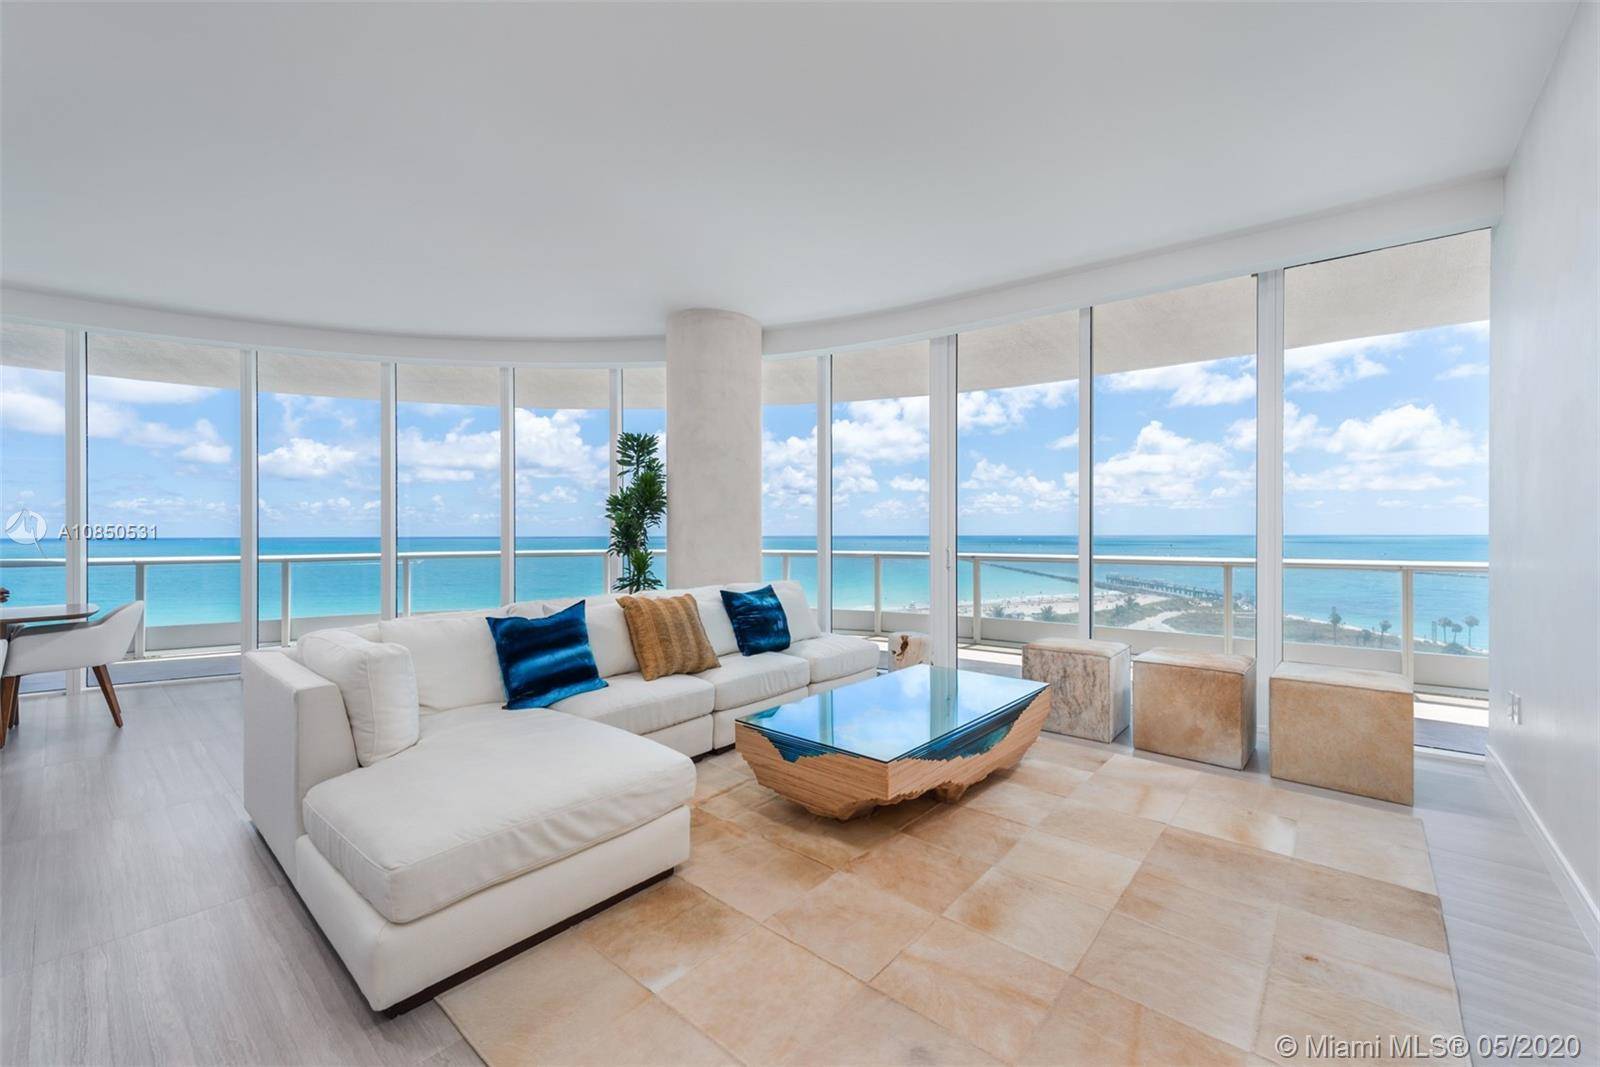 Enjoy the best views in Miami Beach from this coveted 06 line at Continuum South Tower.